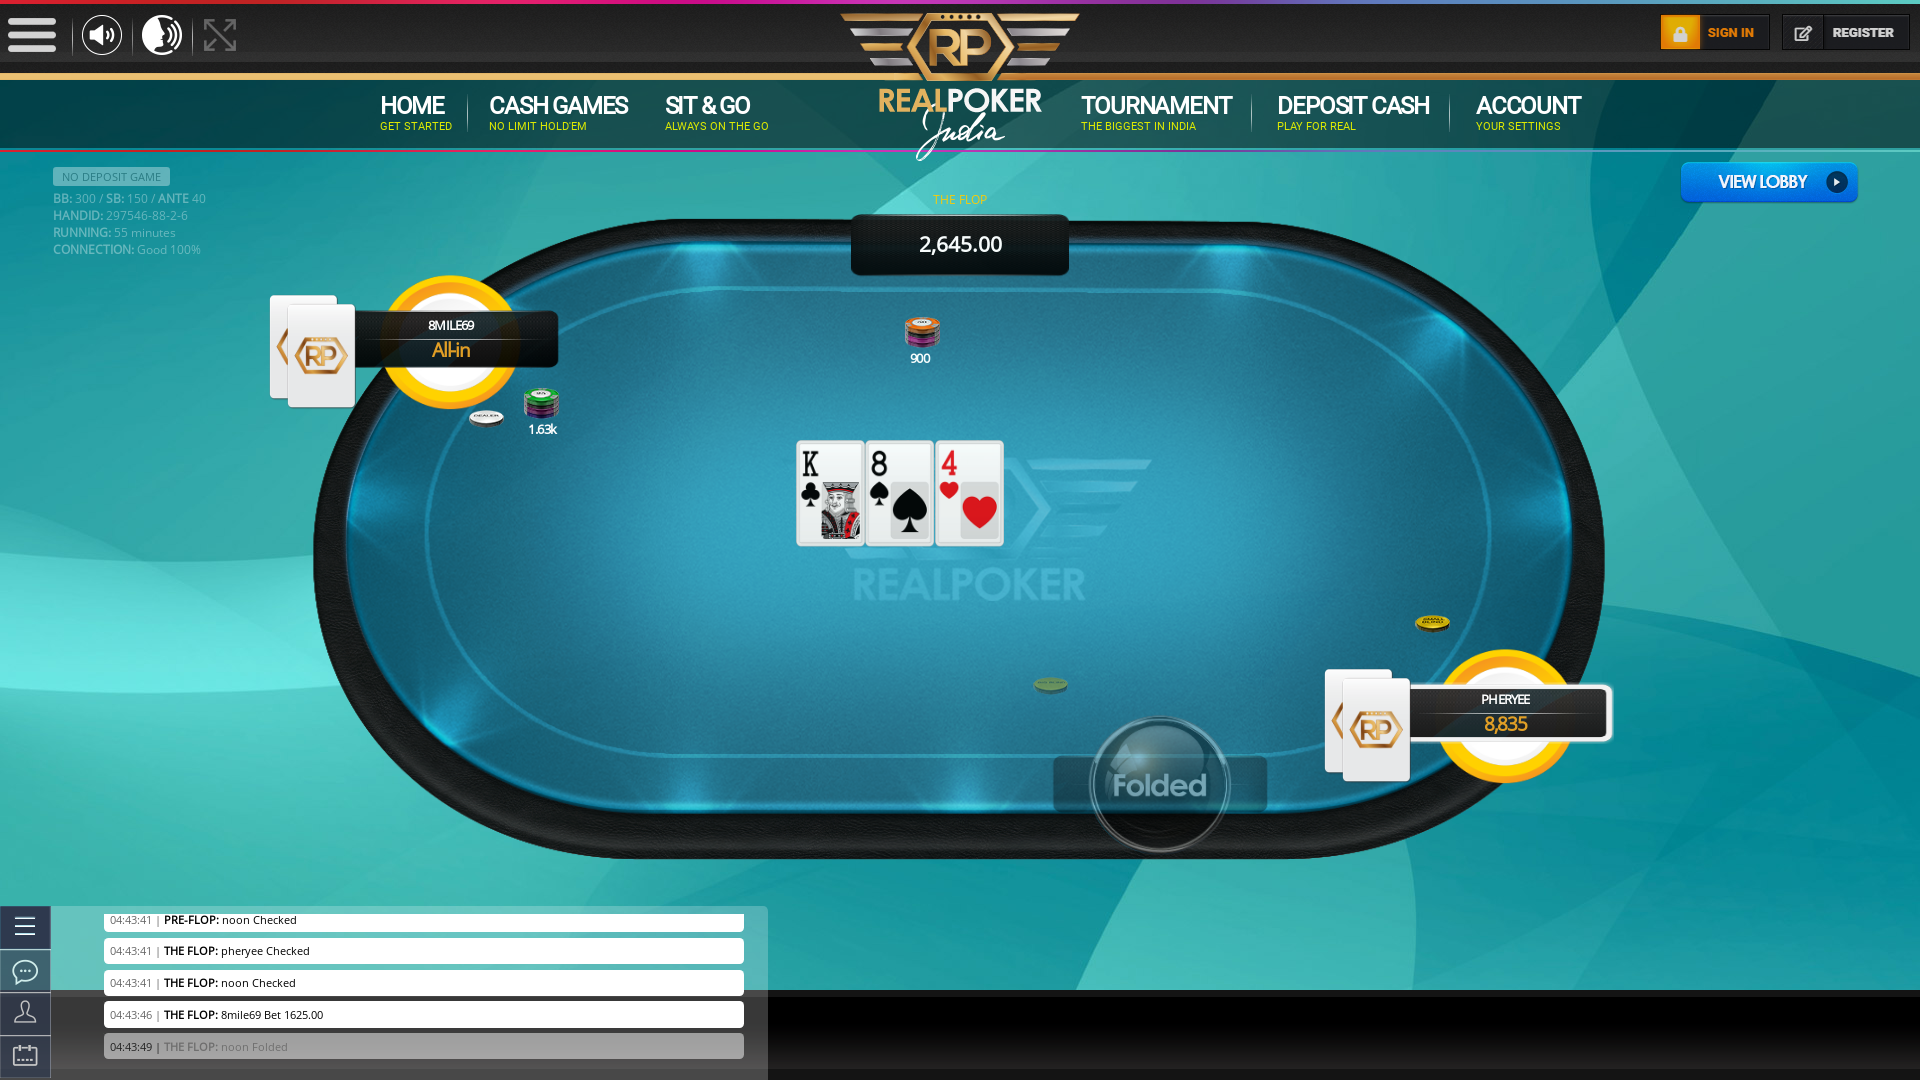 Indian poker on a 10 player table in the 55th minute